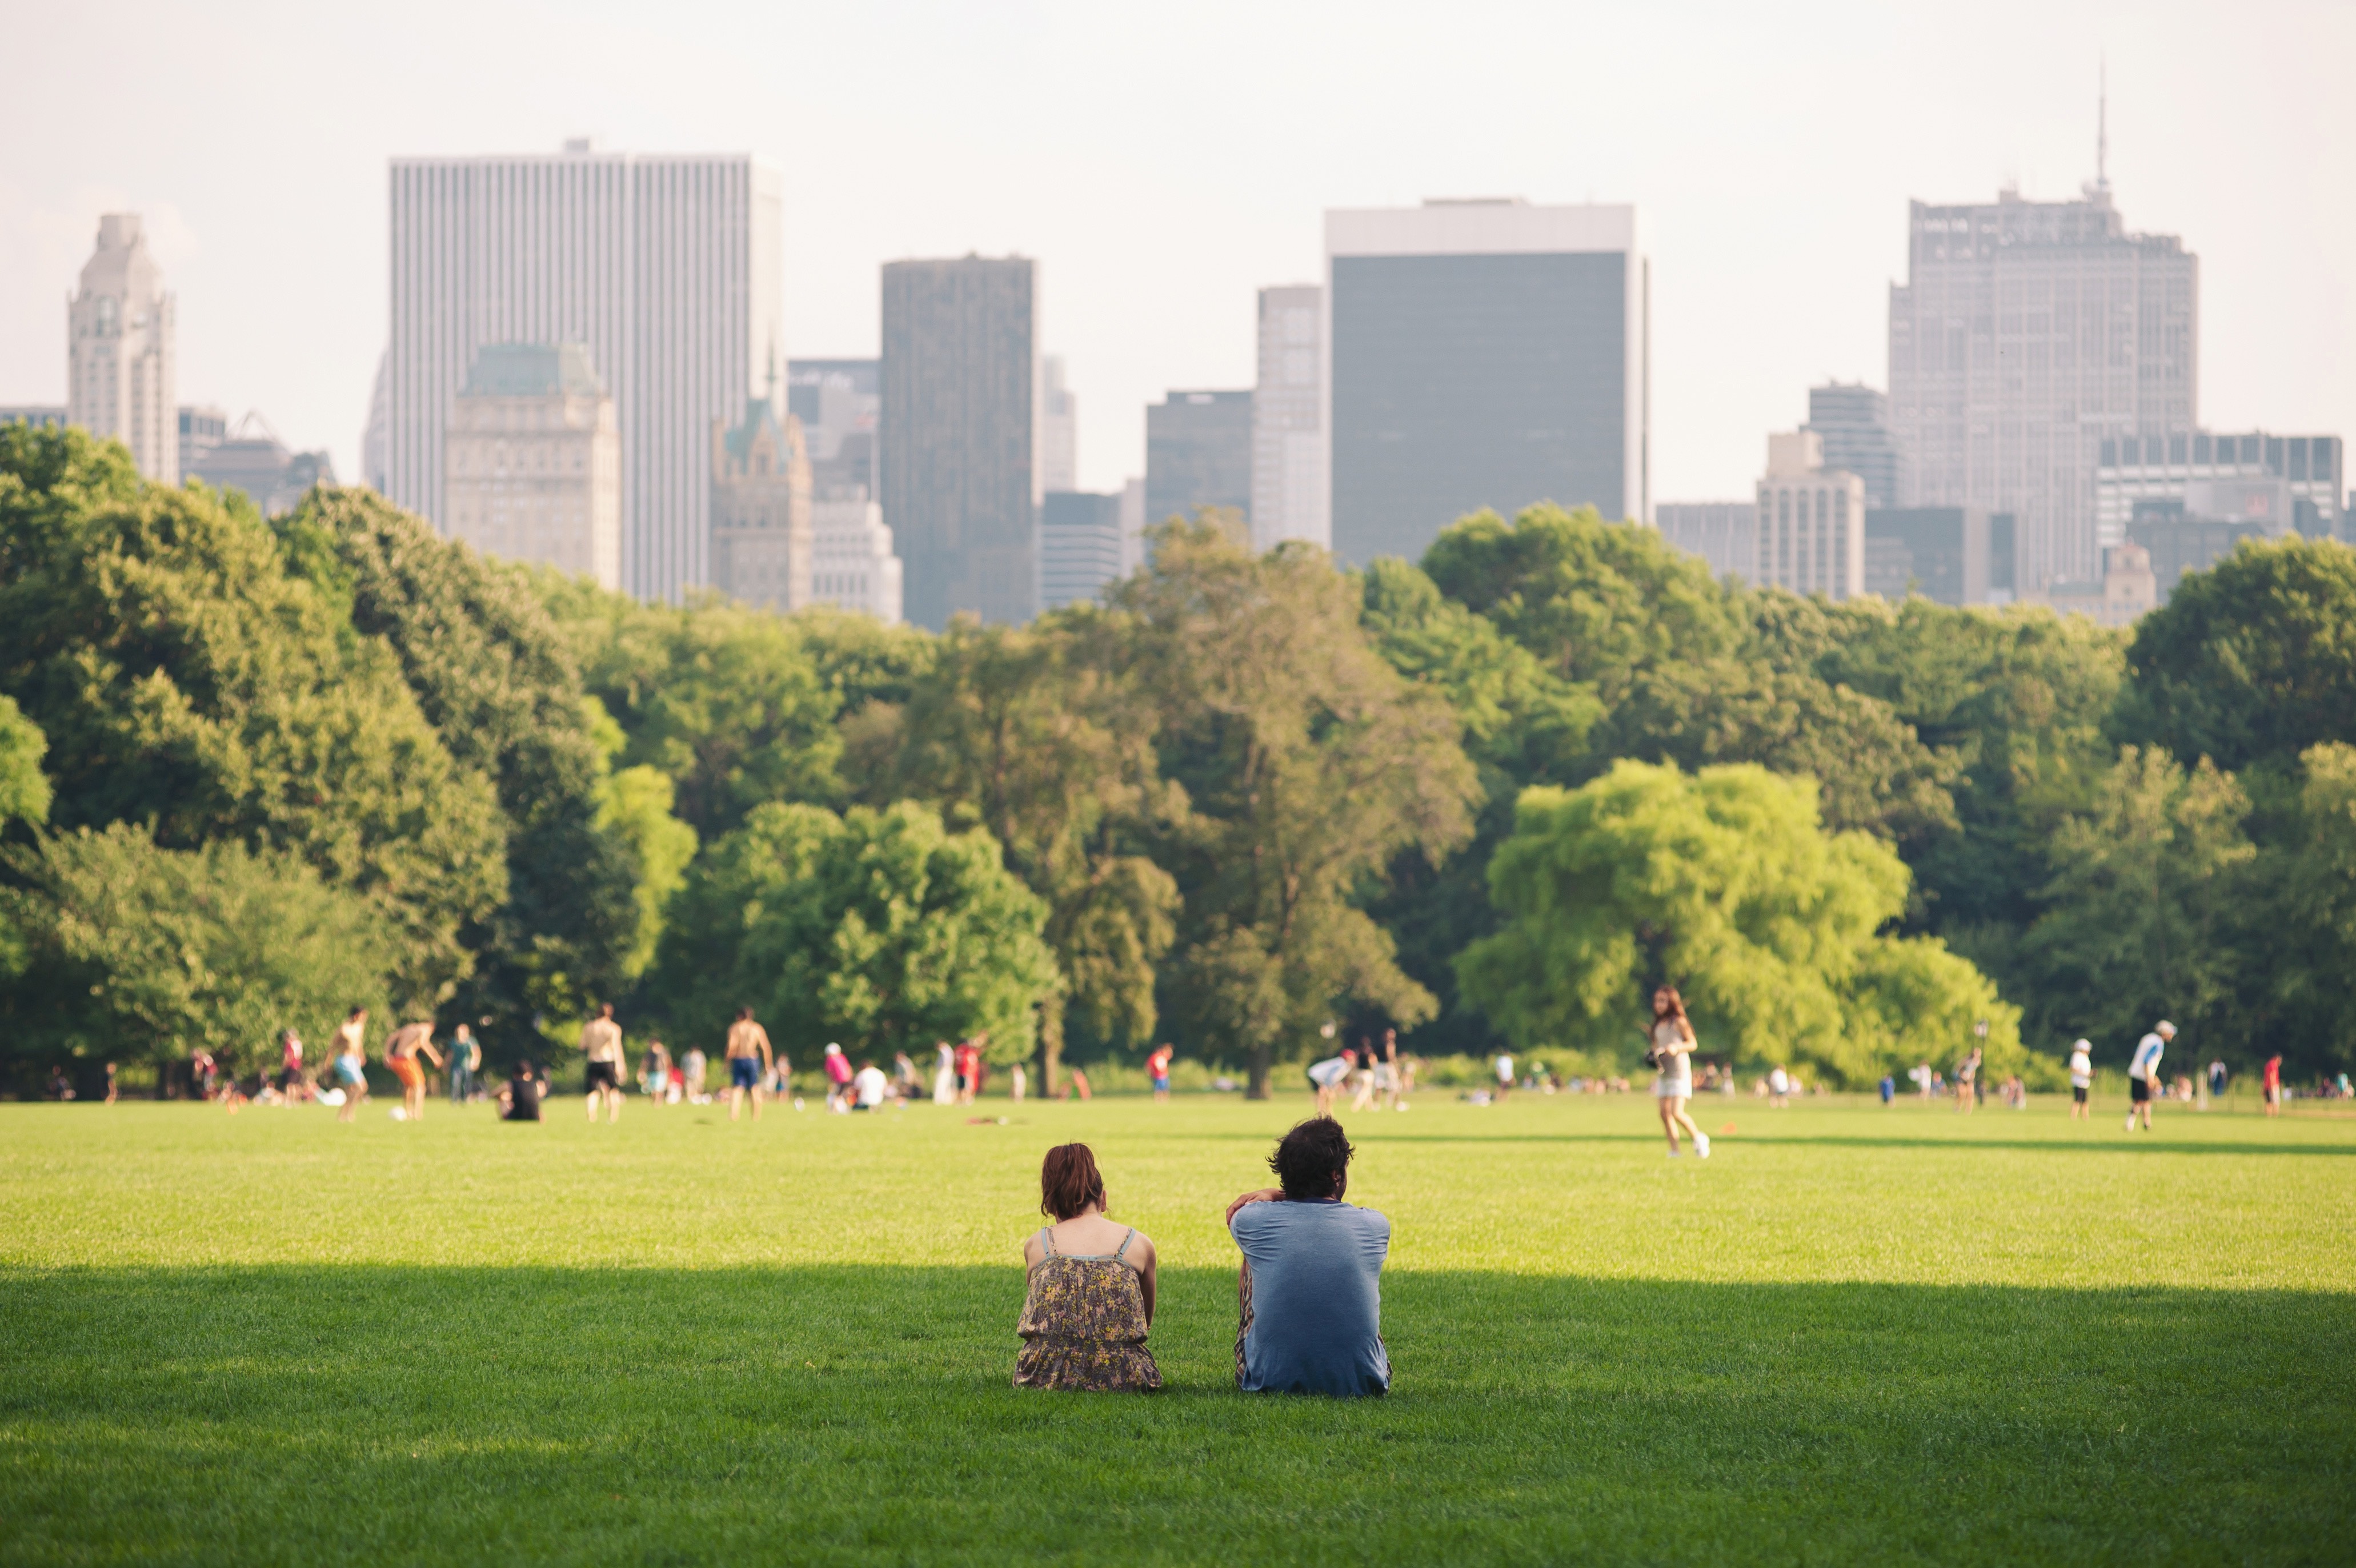 A couple sitting on the grass in central park